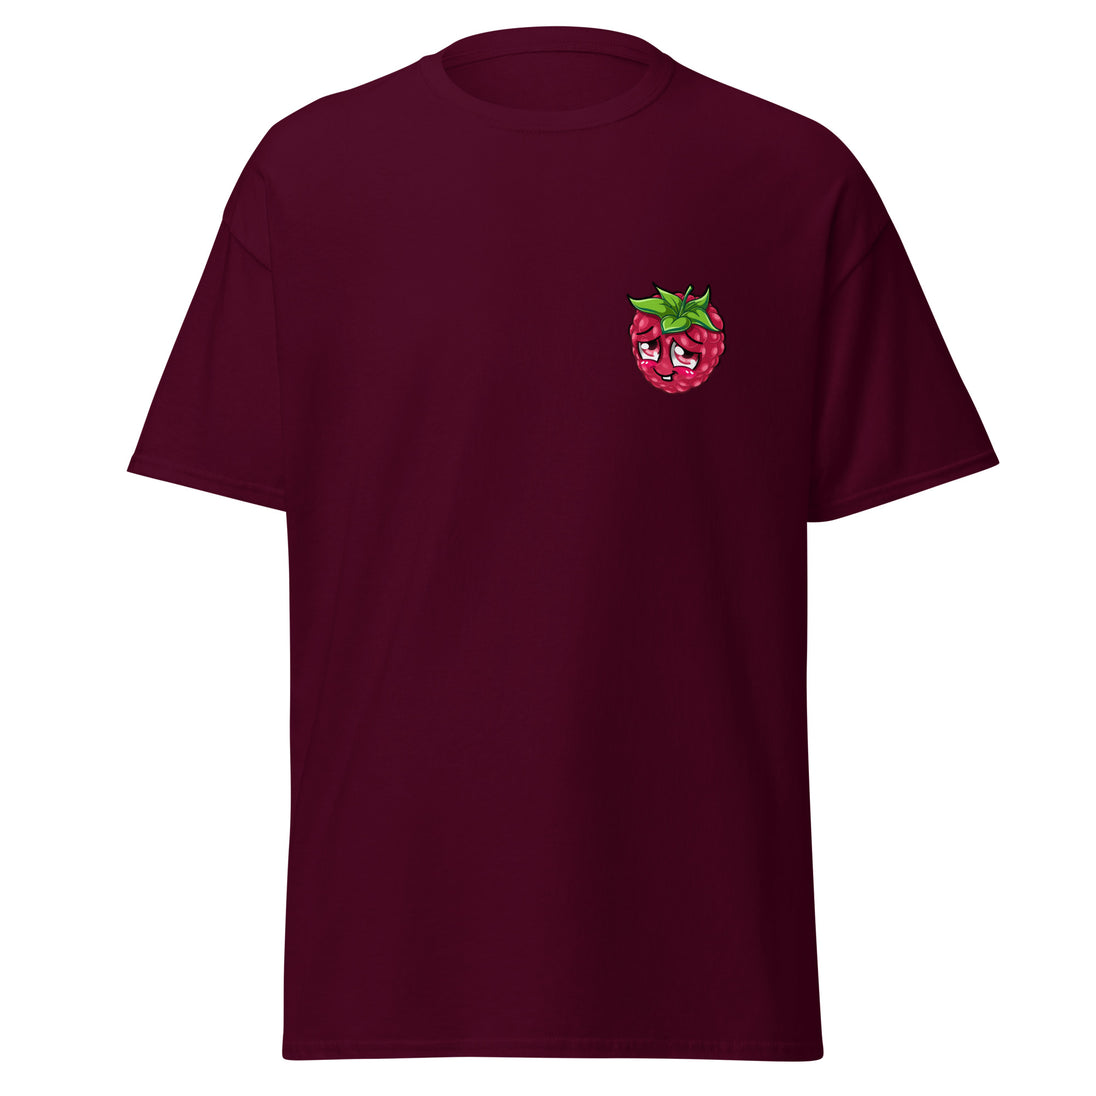 Strawberry Gamer T-Shirt - Soft, High-Quality, Unique Design for Gamers and Streamers